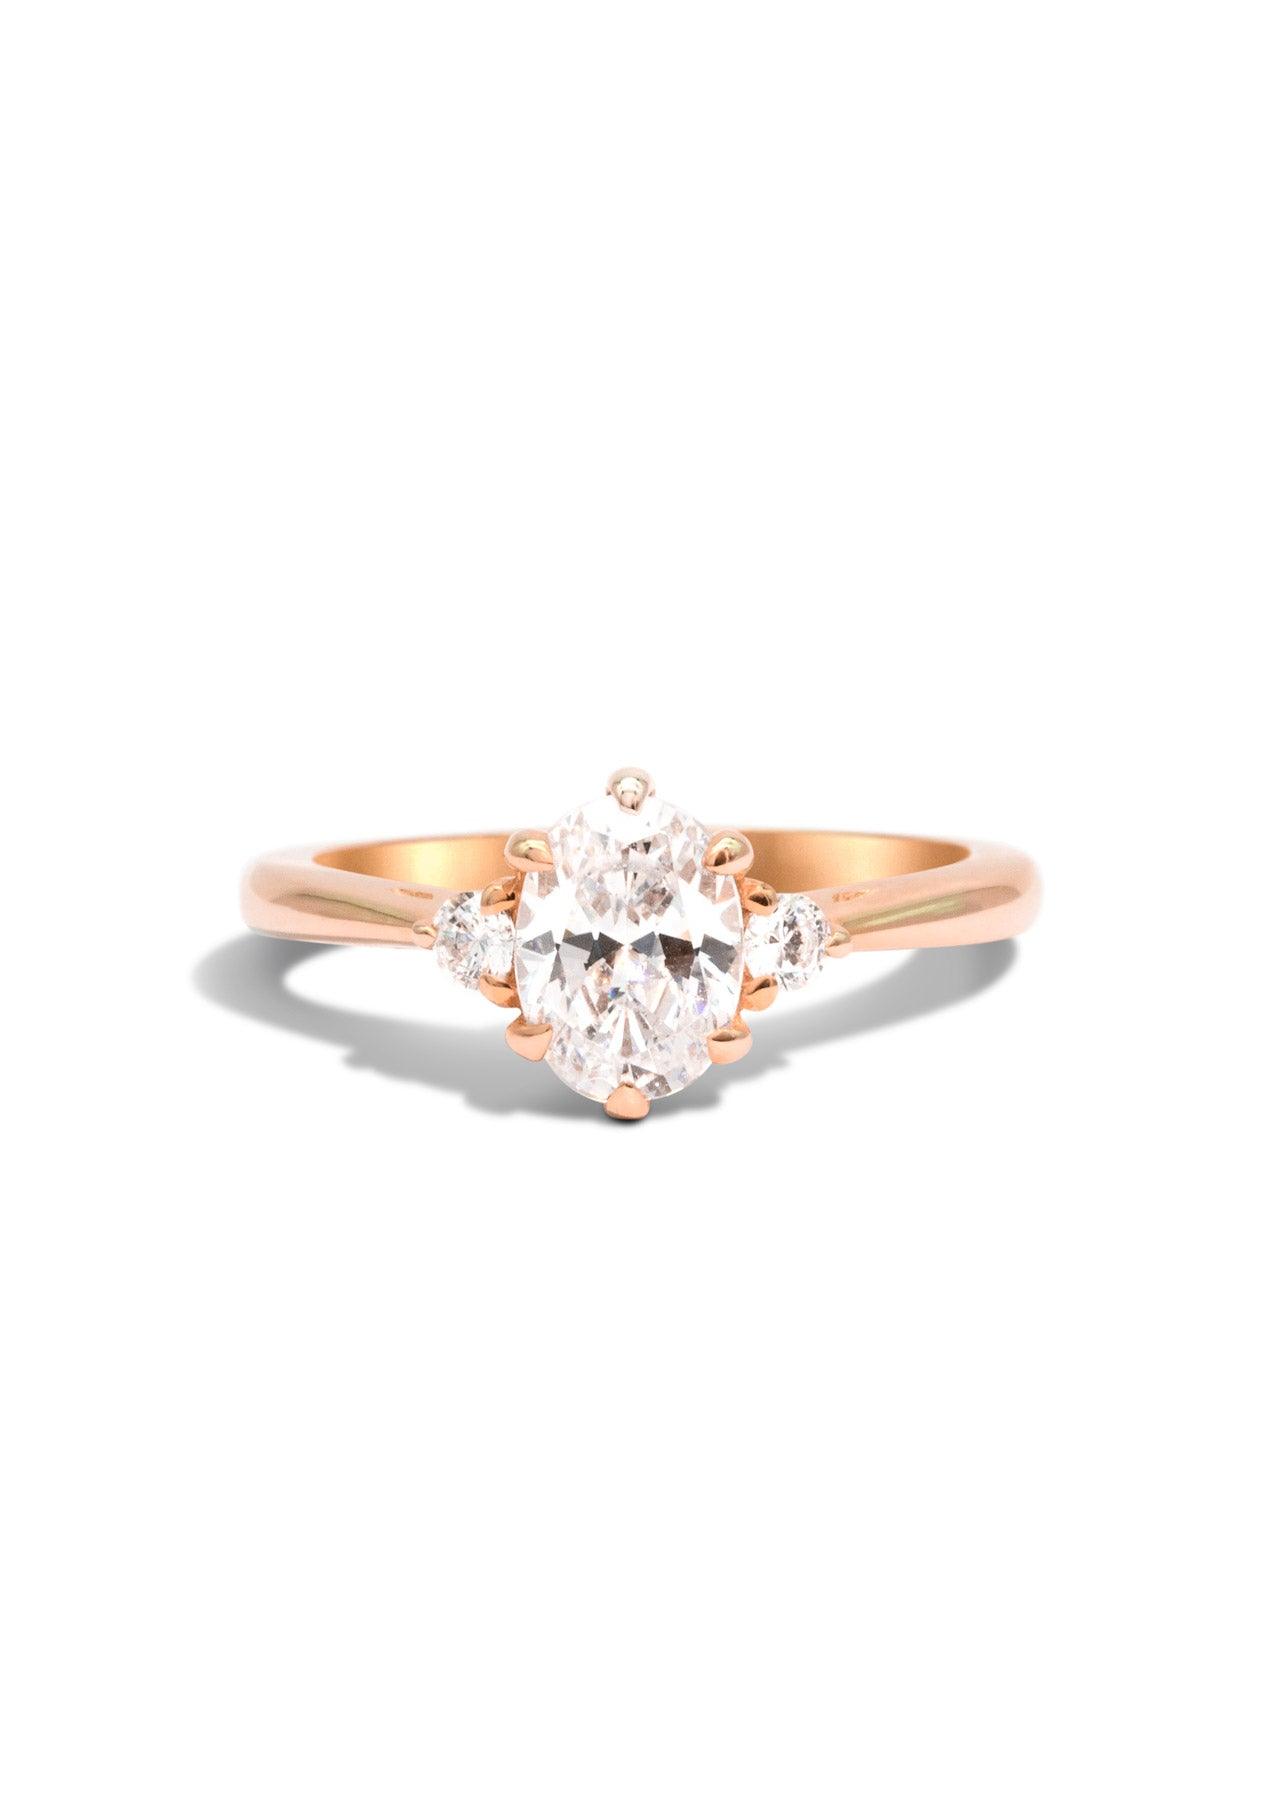 The Esme Rose Gold Cultured Diamond Ring